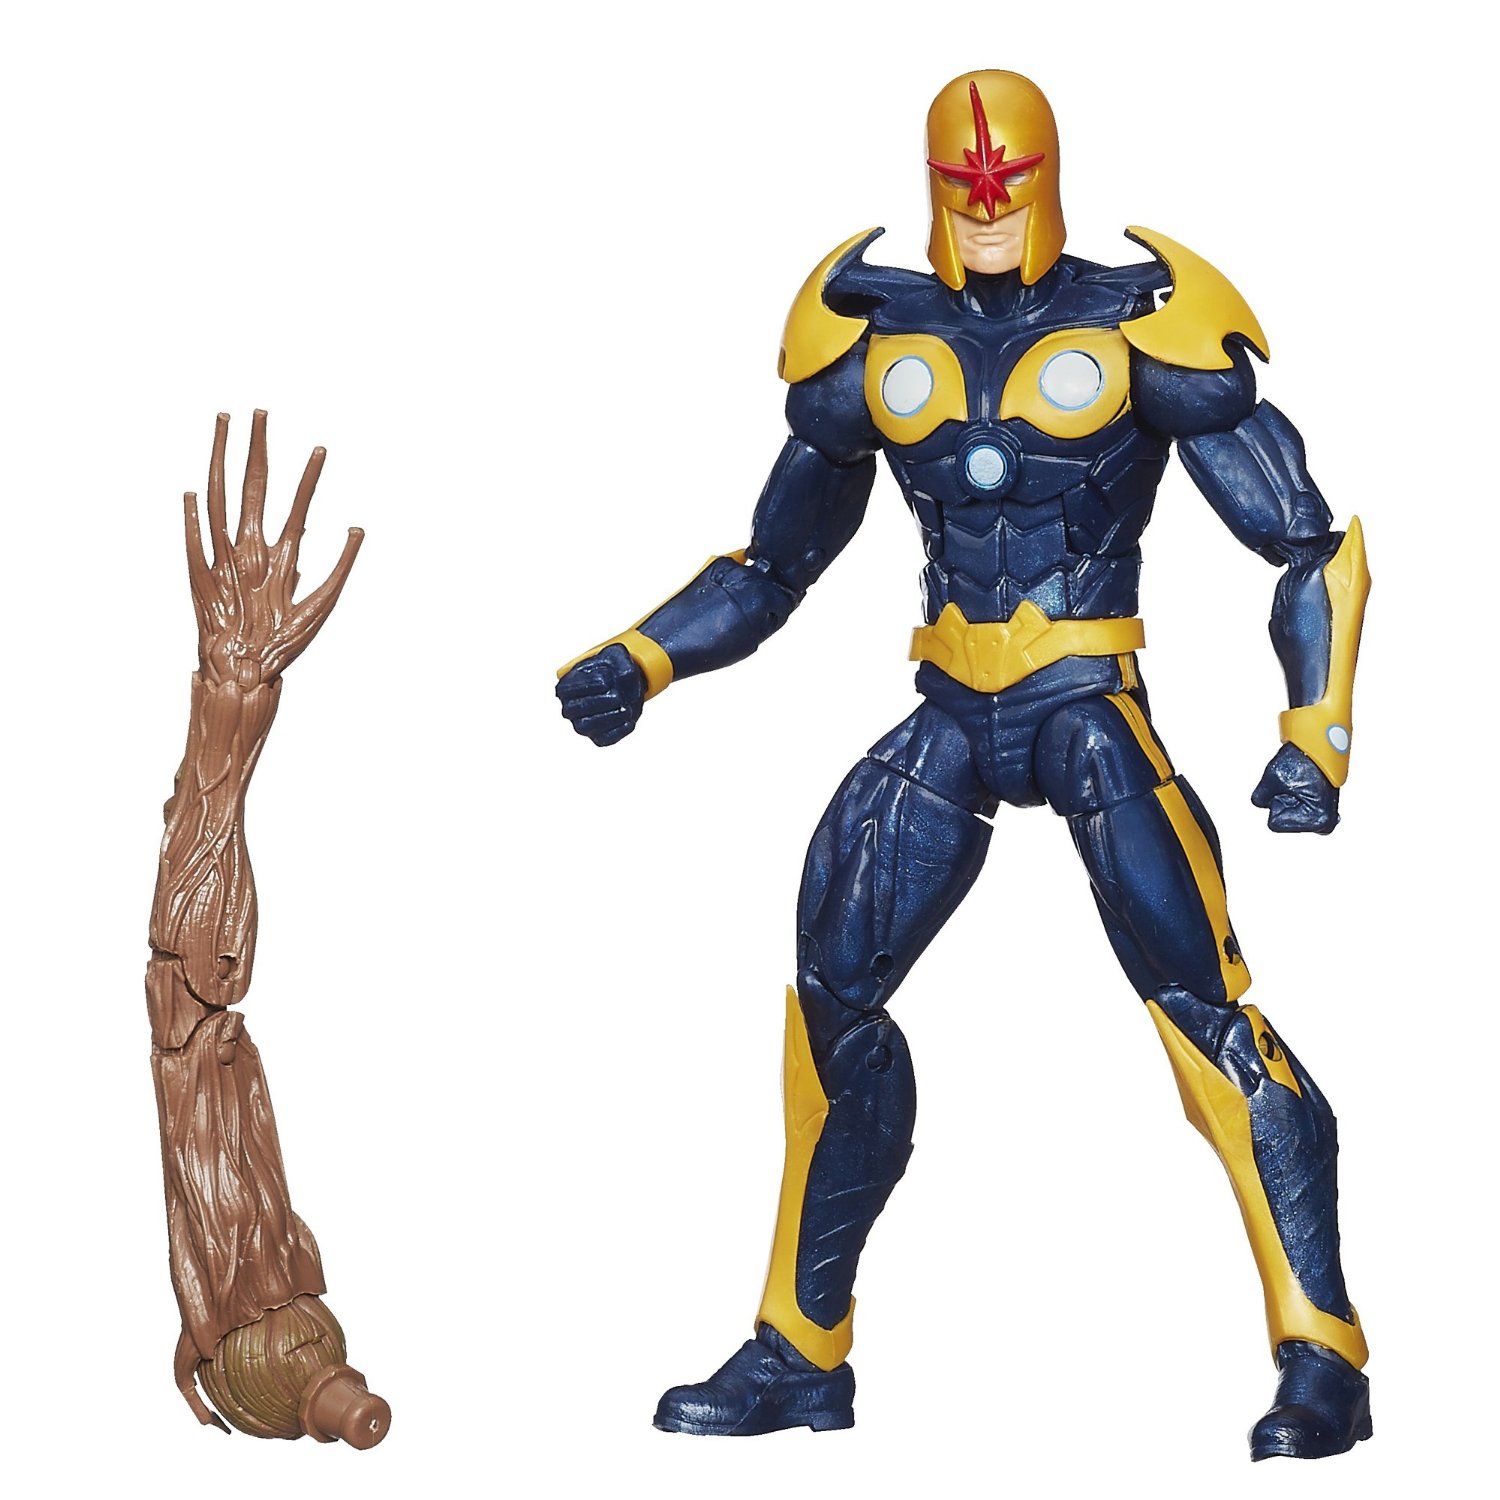 Marvel Legends Guardians of the Galaxy Figures up for Pre